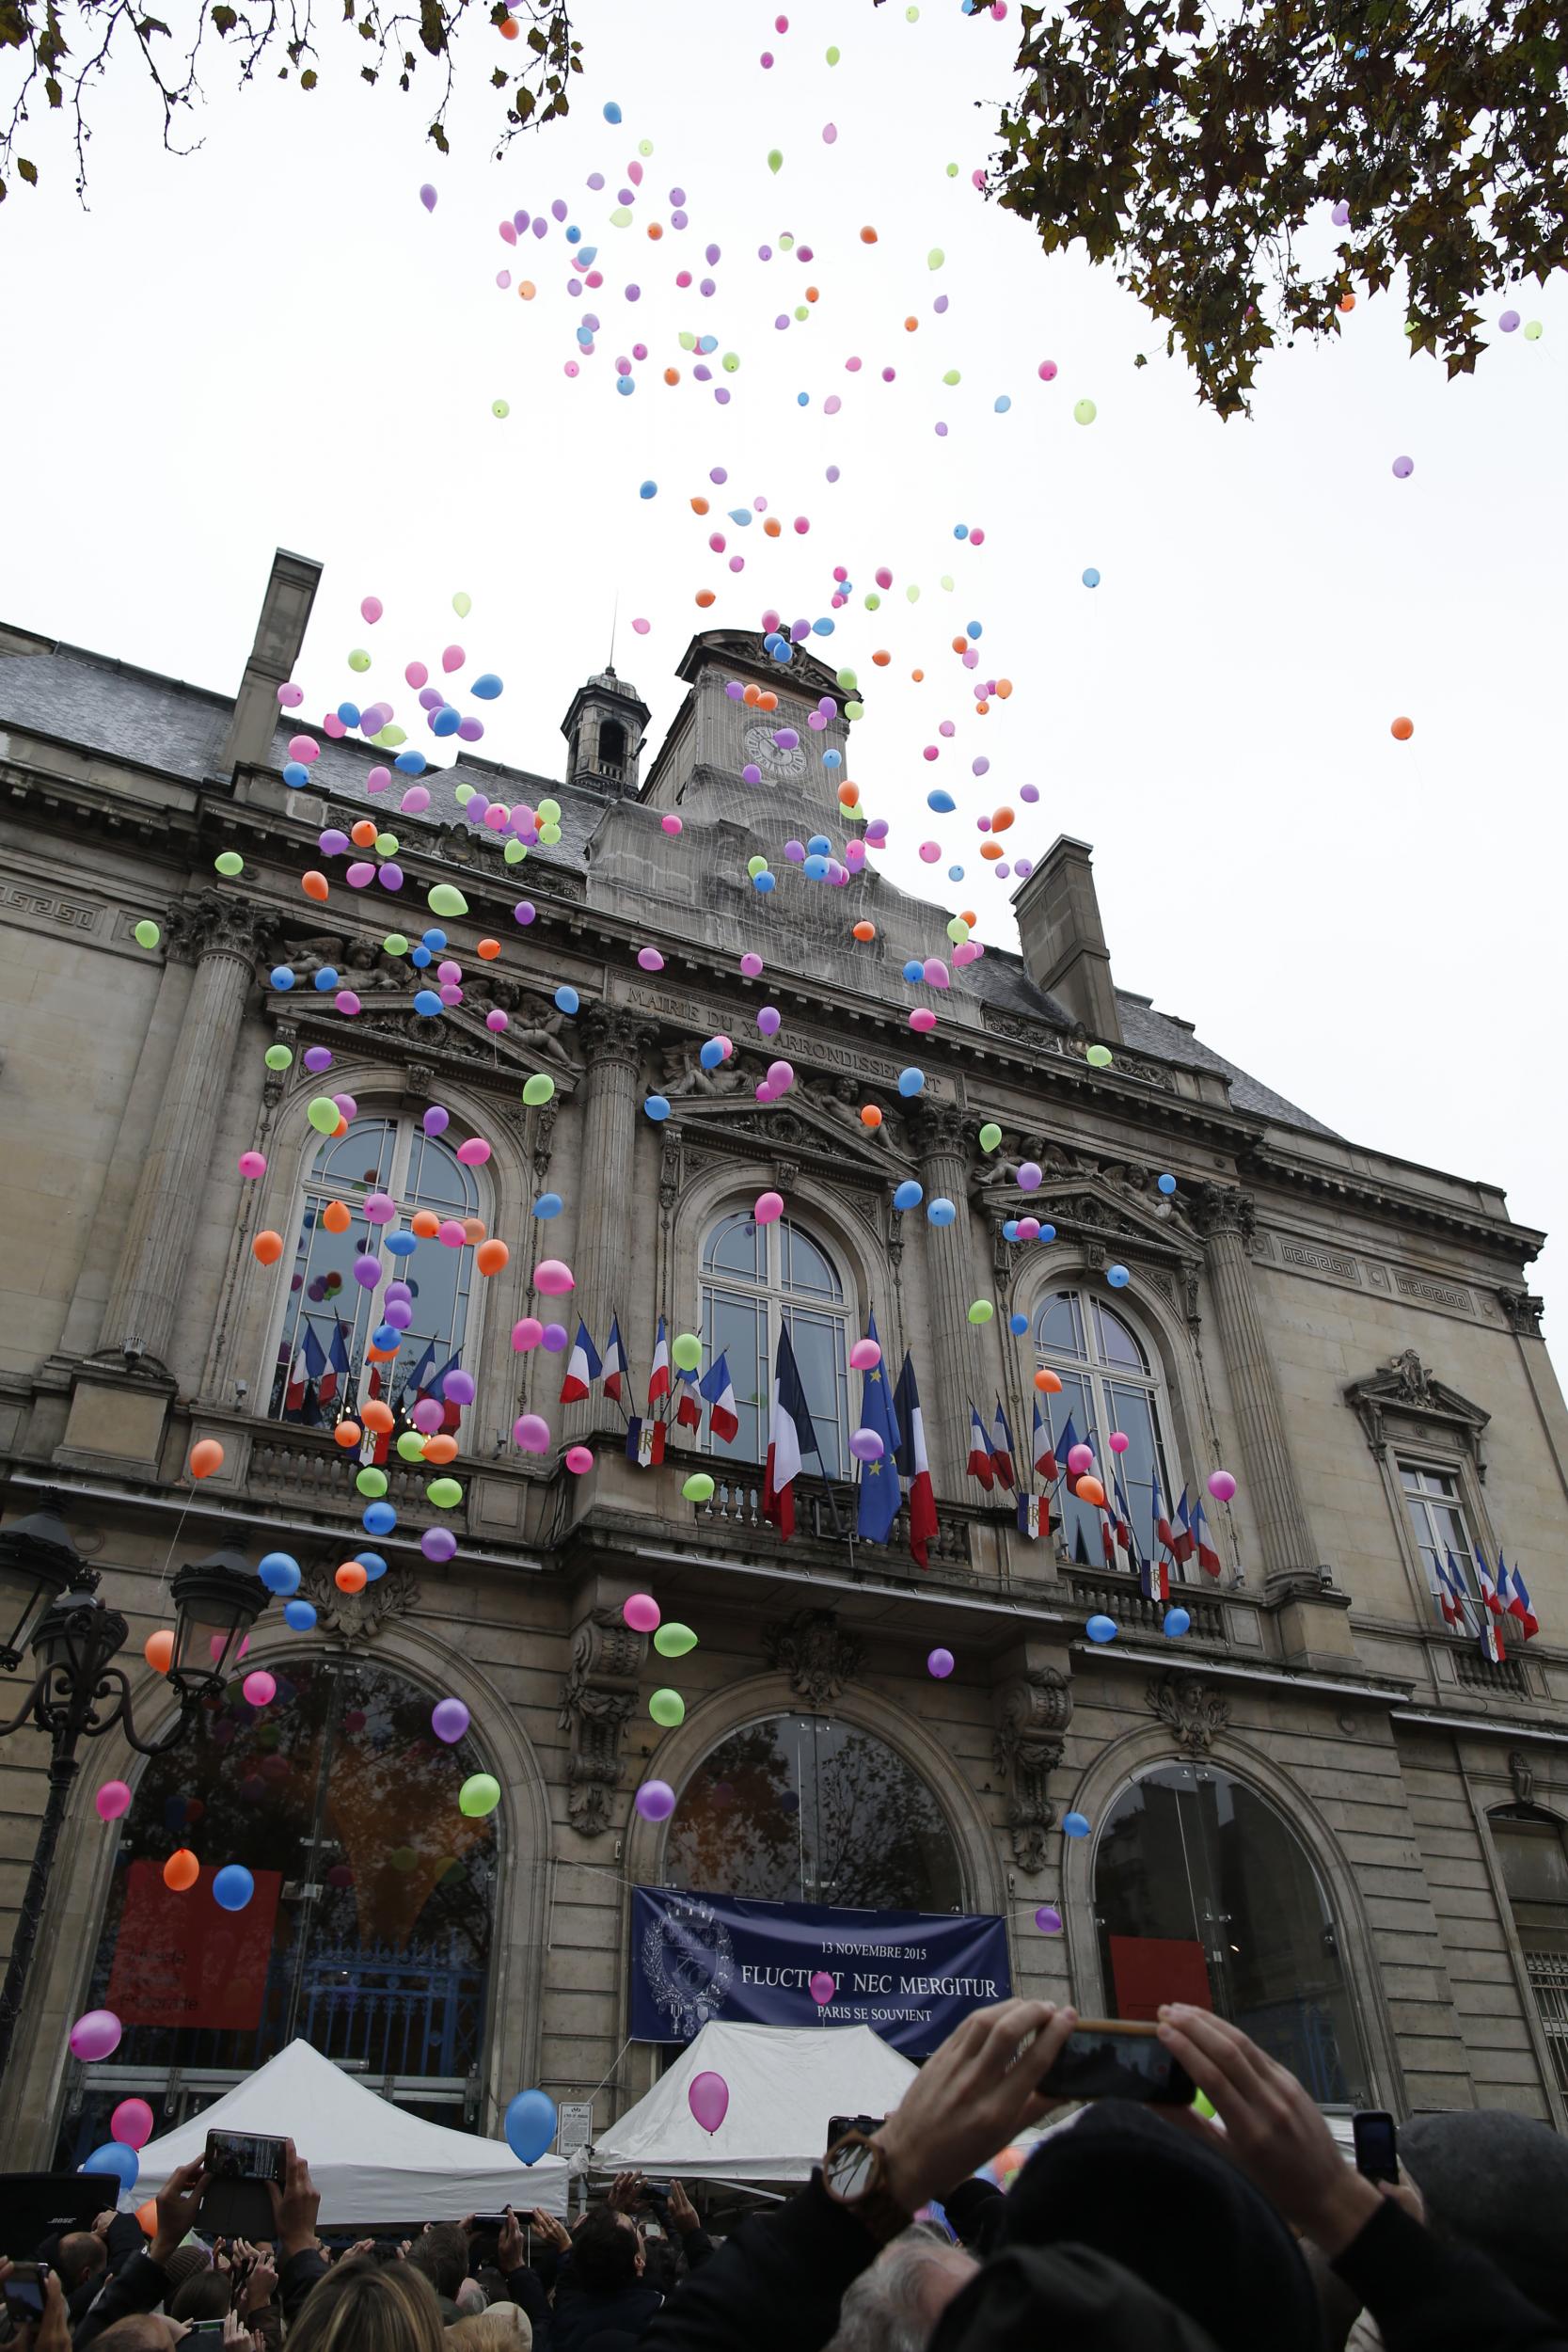 Balloons are released in front of Paris 11th district town hall, France, November 13, 2016, during a ceremony held for the victims of last year's Paris attacks which targeted the Bataclan concert hall as well as a series of bars and killed 130 people